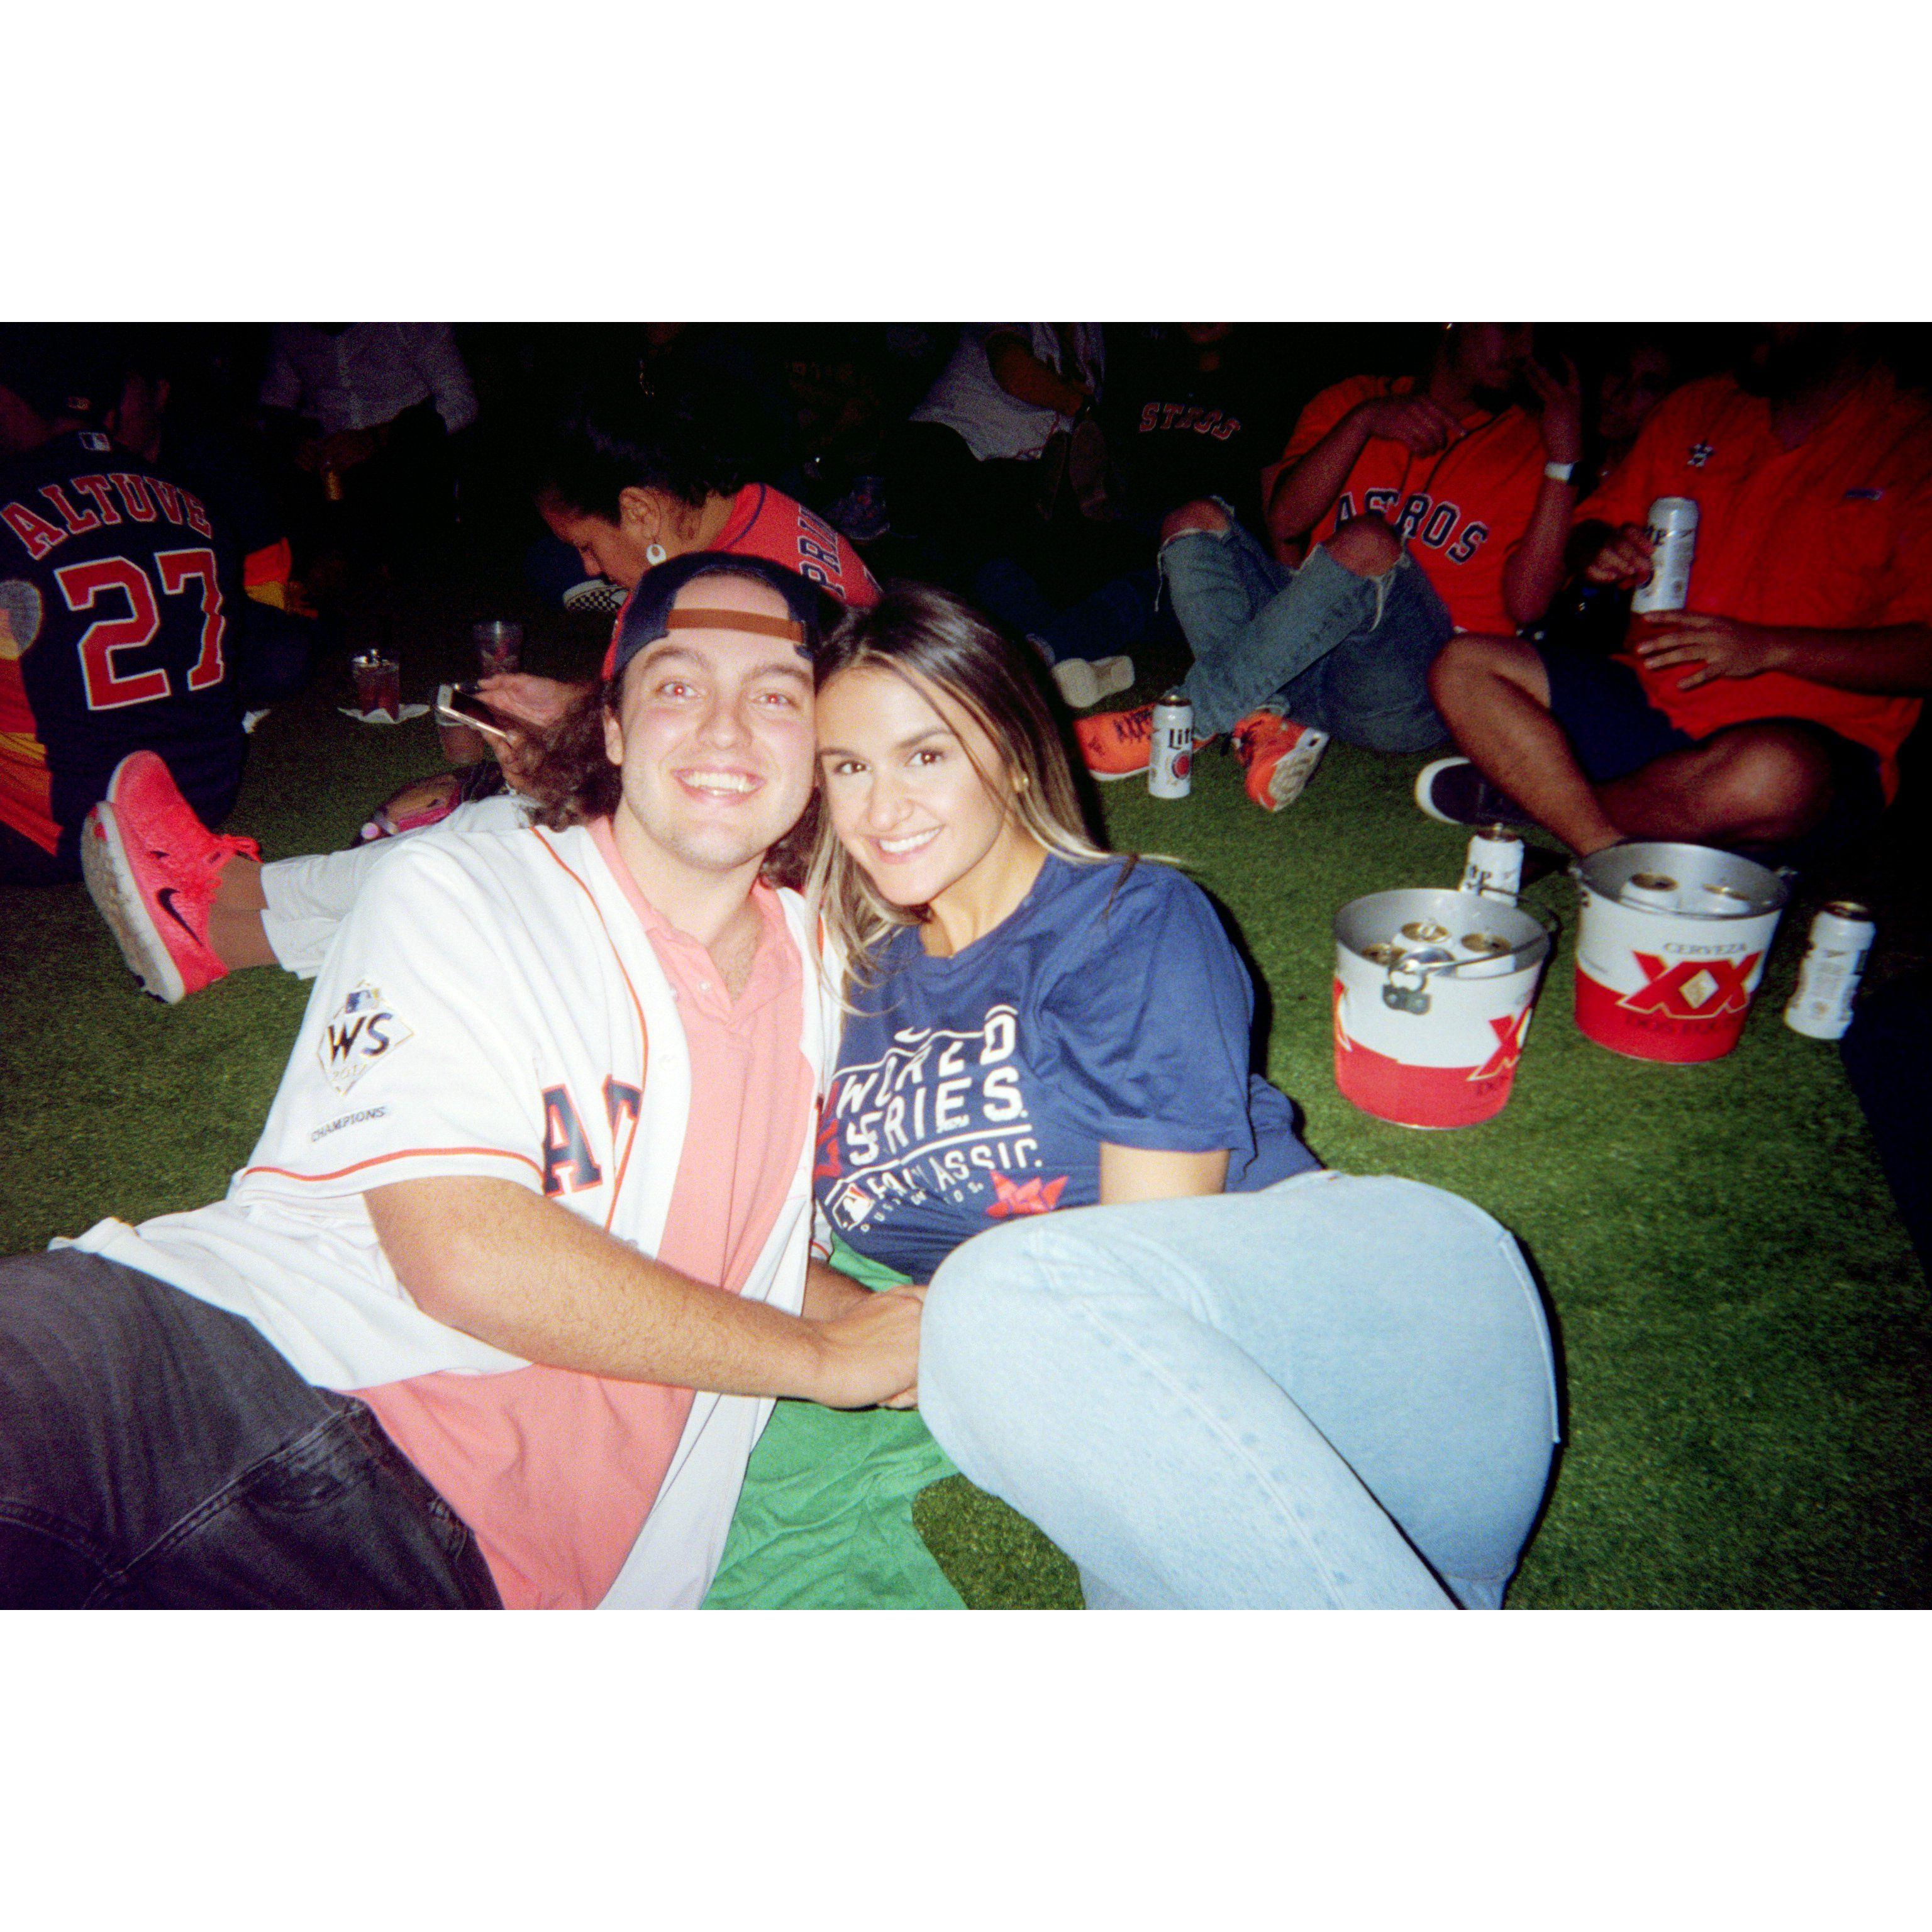 We have too many pics of us celebrating the Astros...enjoy this from a disposable camera 2019